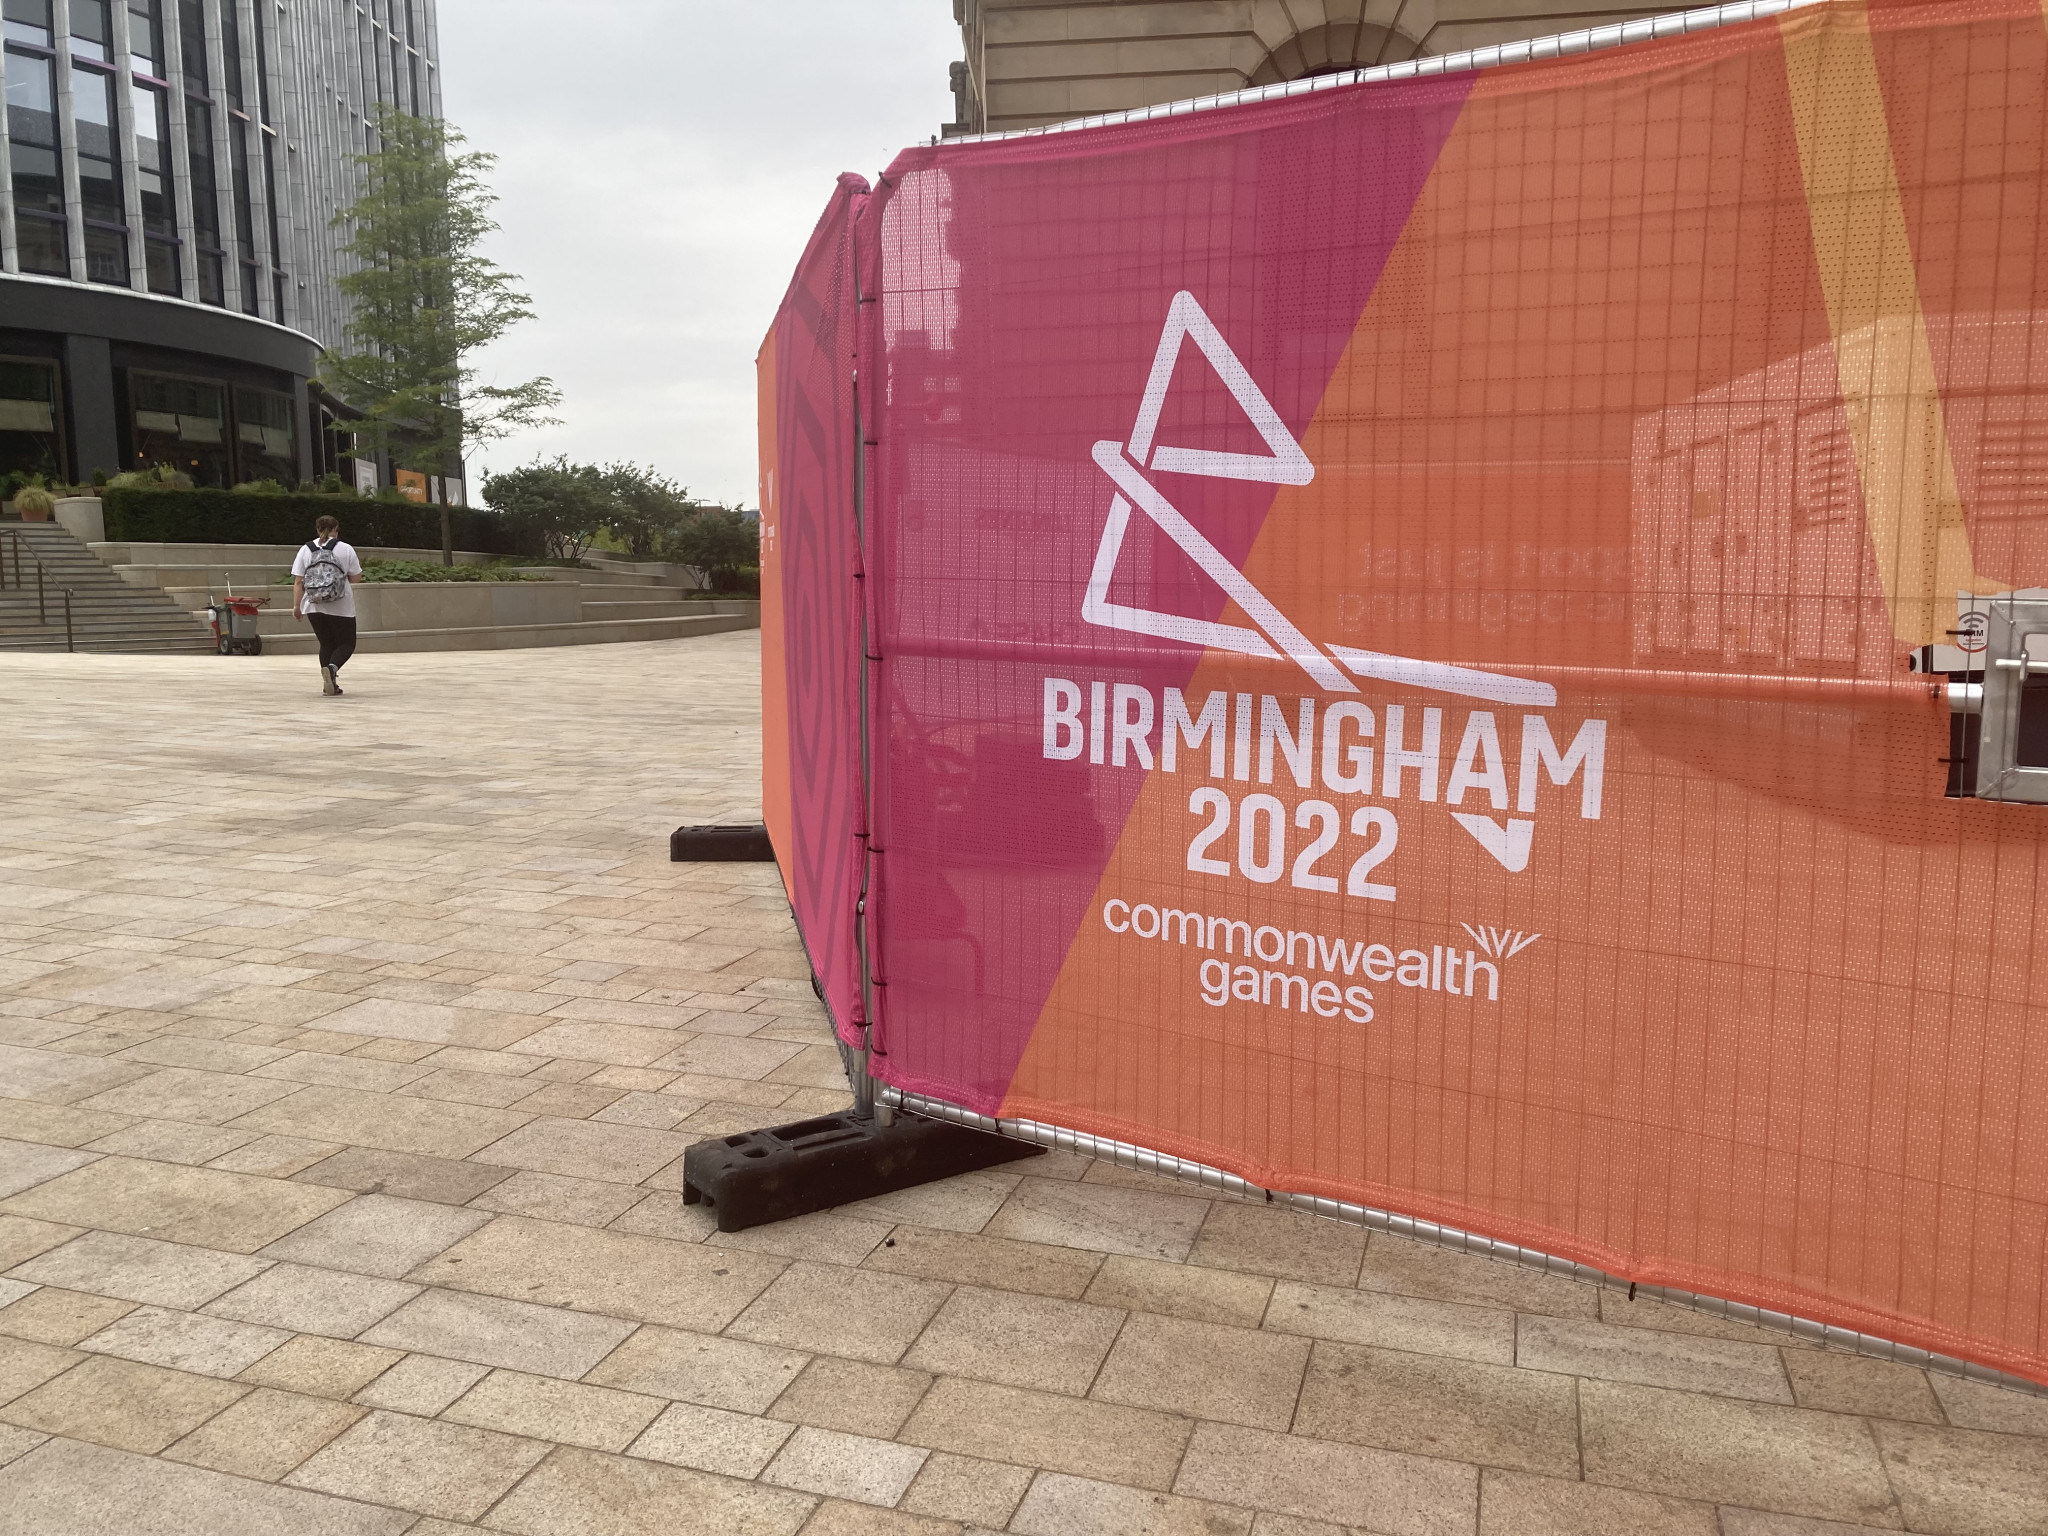 Birmingham 2022 organisers are aiming to sell a record 1.5 million tickets for the Commonwealth Games ©ITG